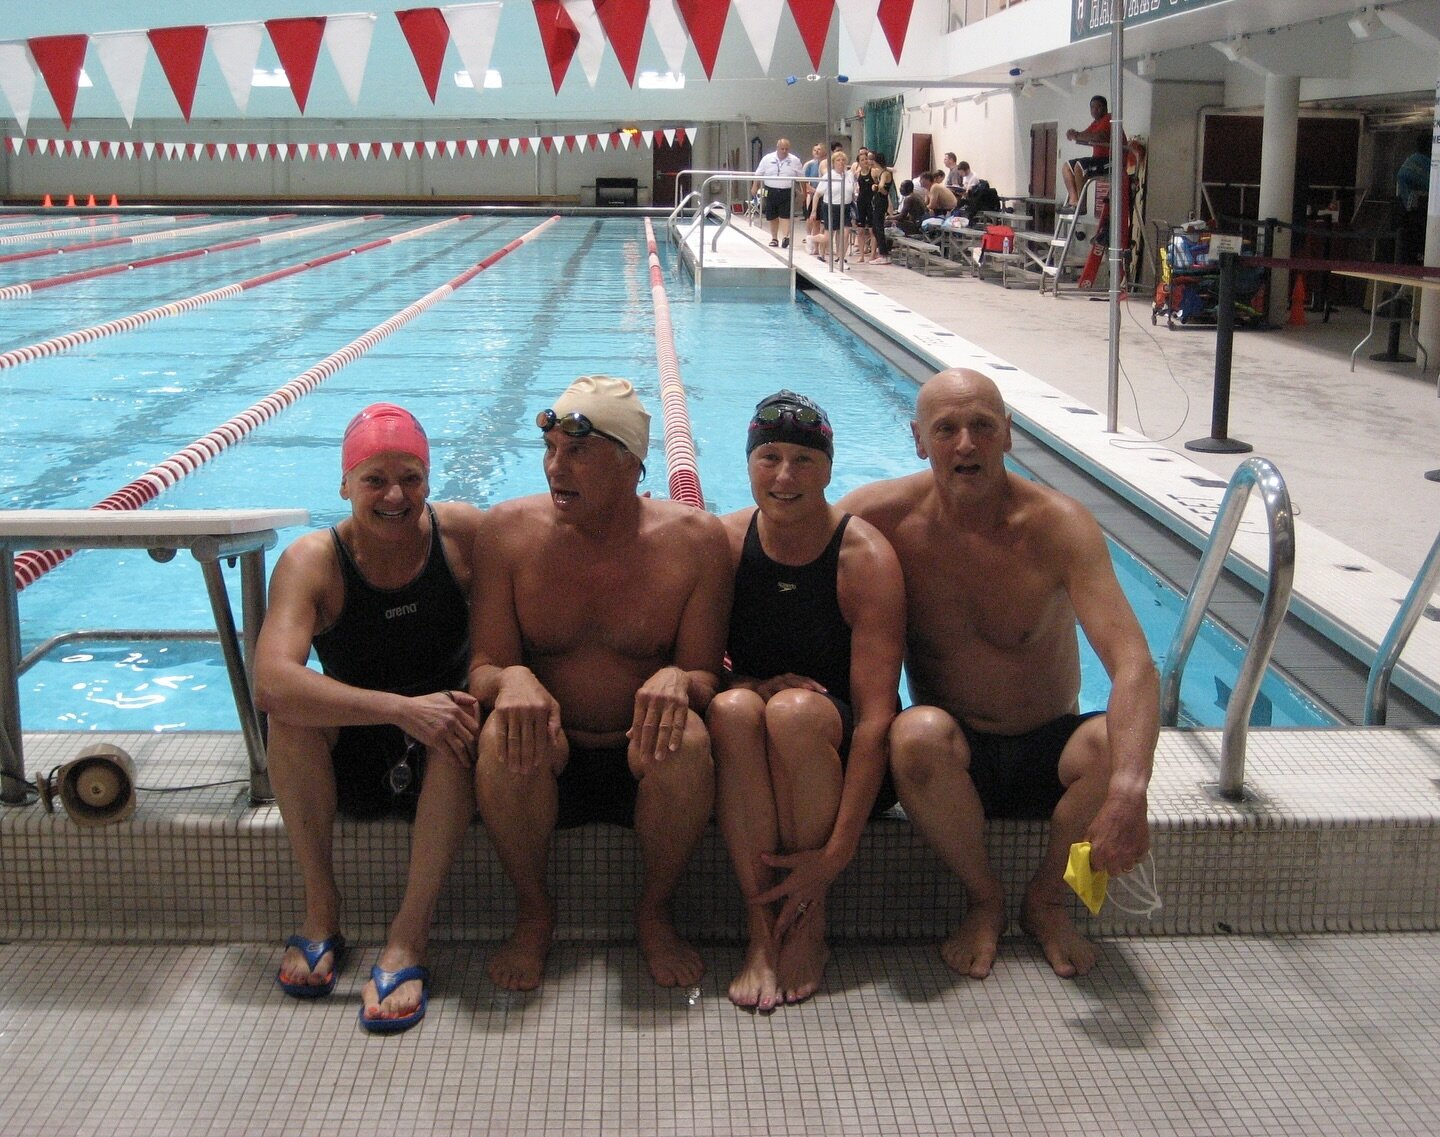 When was the first time you swam at Blodgett pool? As an age grouper? Or in college? Or a Masters meet? Here&rsquo;s a throwback to June 2012 with Jacki, Greg, Tracy and Dan and their world record setting 400 free relay in the mixed 240-279 age group